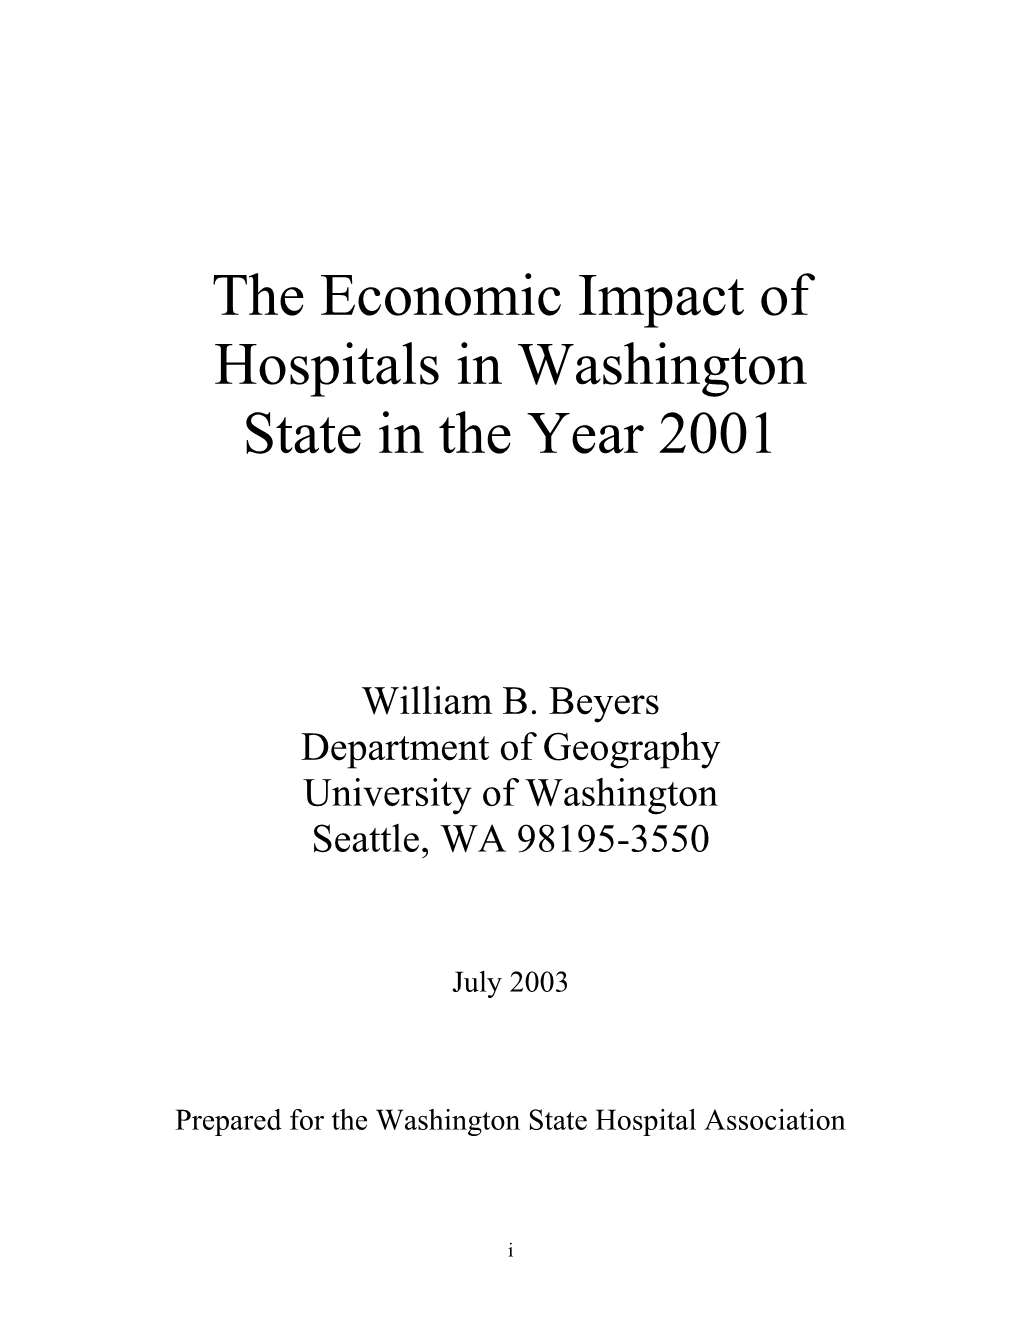 The Economic Impact of Hospitals in Washington State